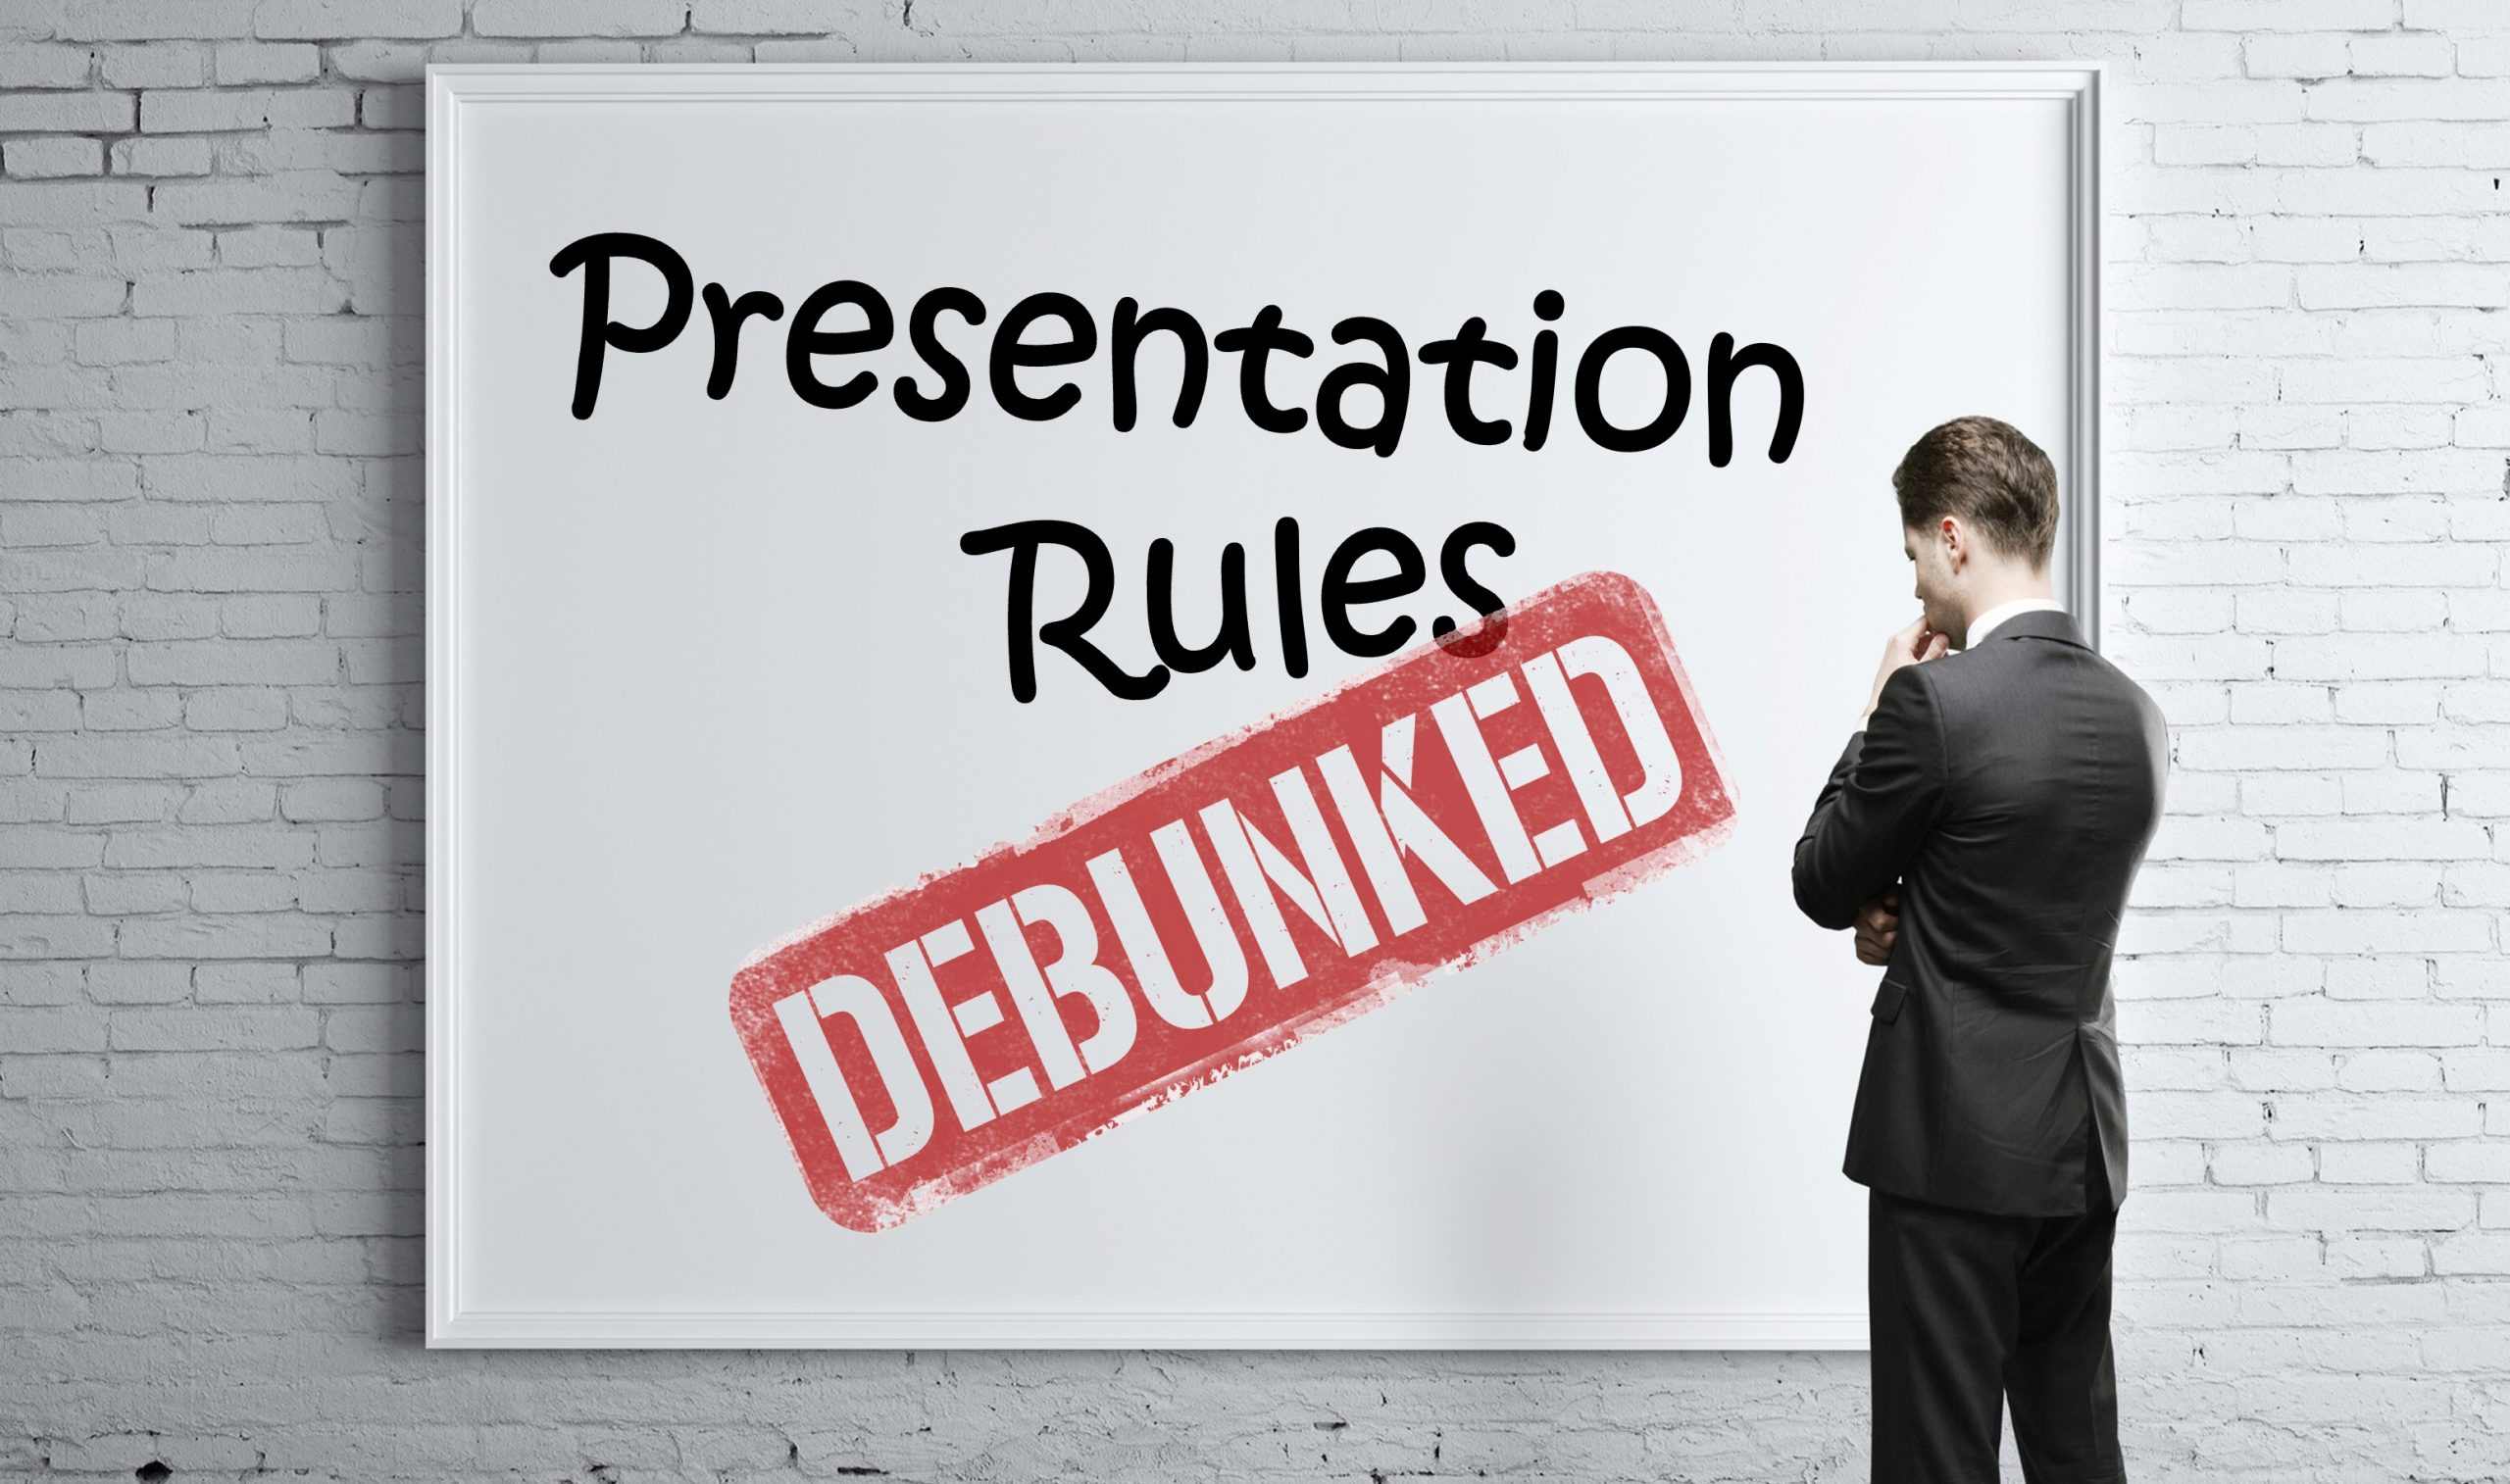 Presentation Rules and Common Myths Debunked: Why Some Advice is Unhelpful and What to do Instead (free webinar)